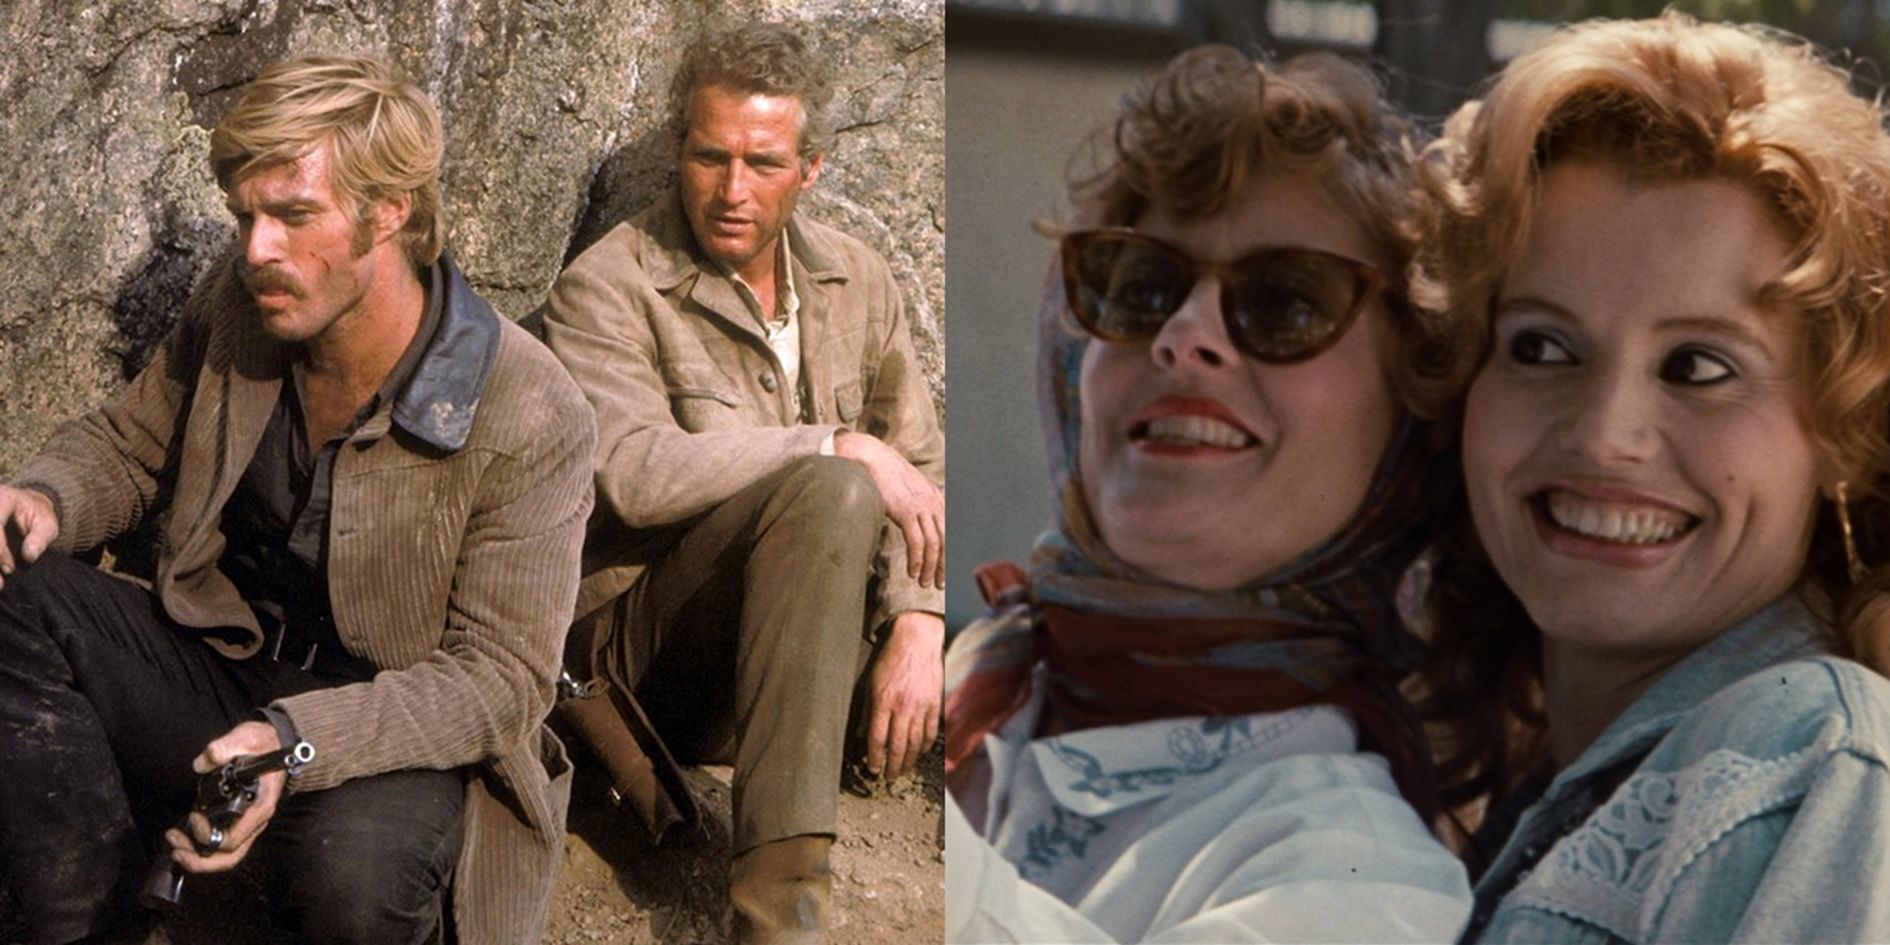 Butch Cassidy and the Sundance Kid and Thelma and Louise